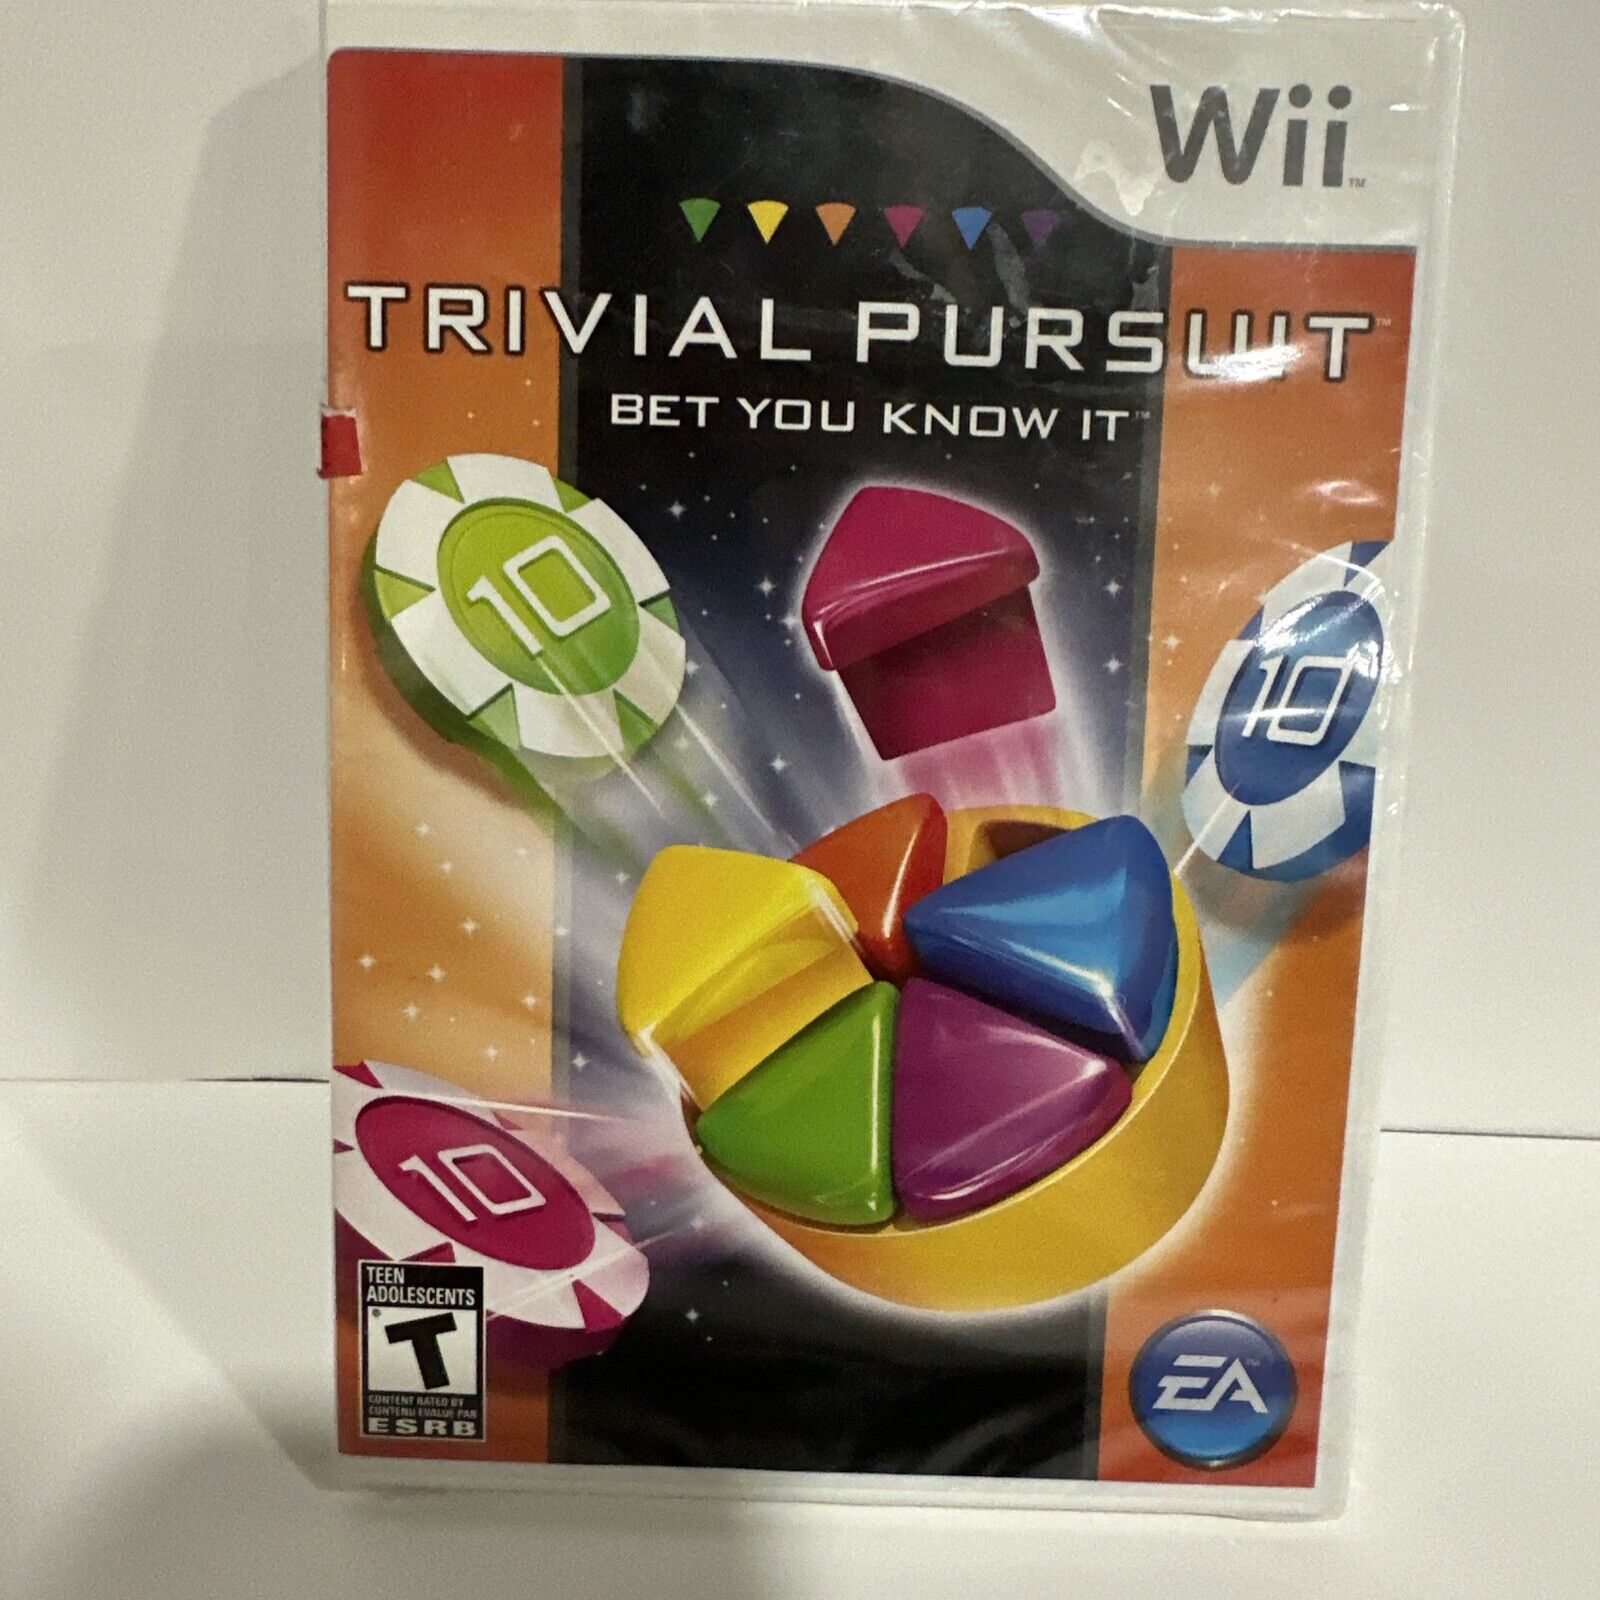 BRAND NEW FACTORY SEALED Trivial Pursuit Game for Nintendo Wii Bet You Know It